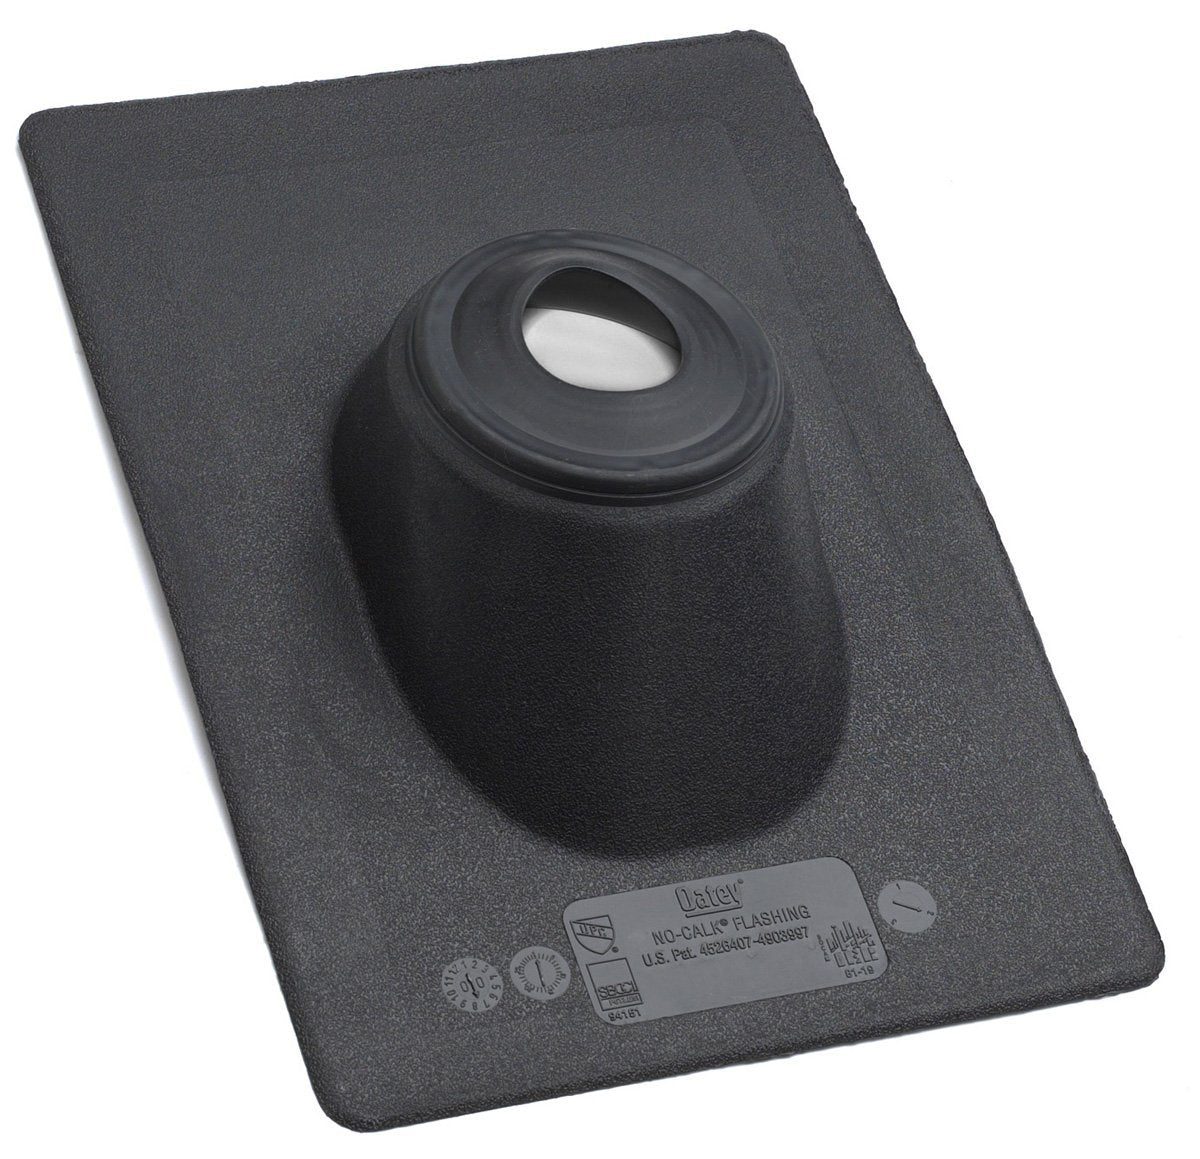 Oatey 11891 No-Calk Standard Base Roof Flashing, 4", Thermoplastic